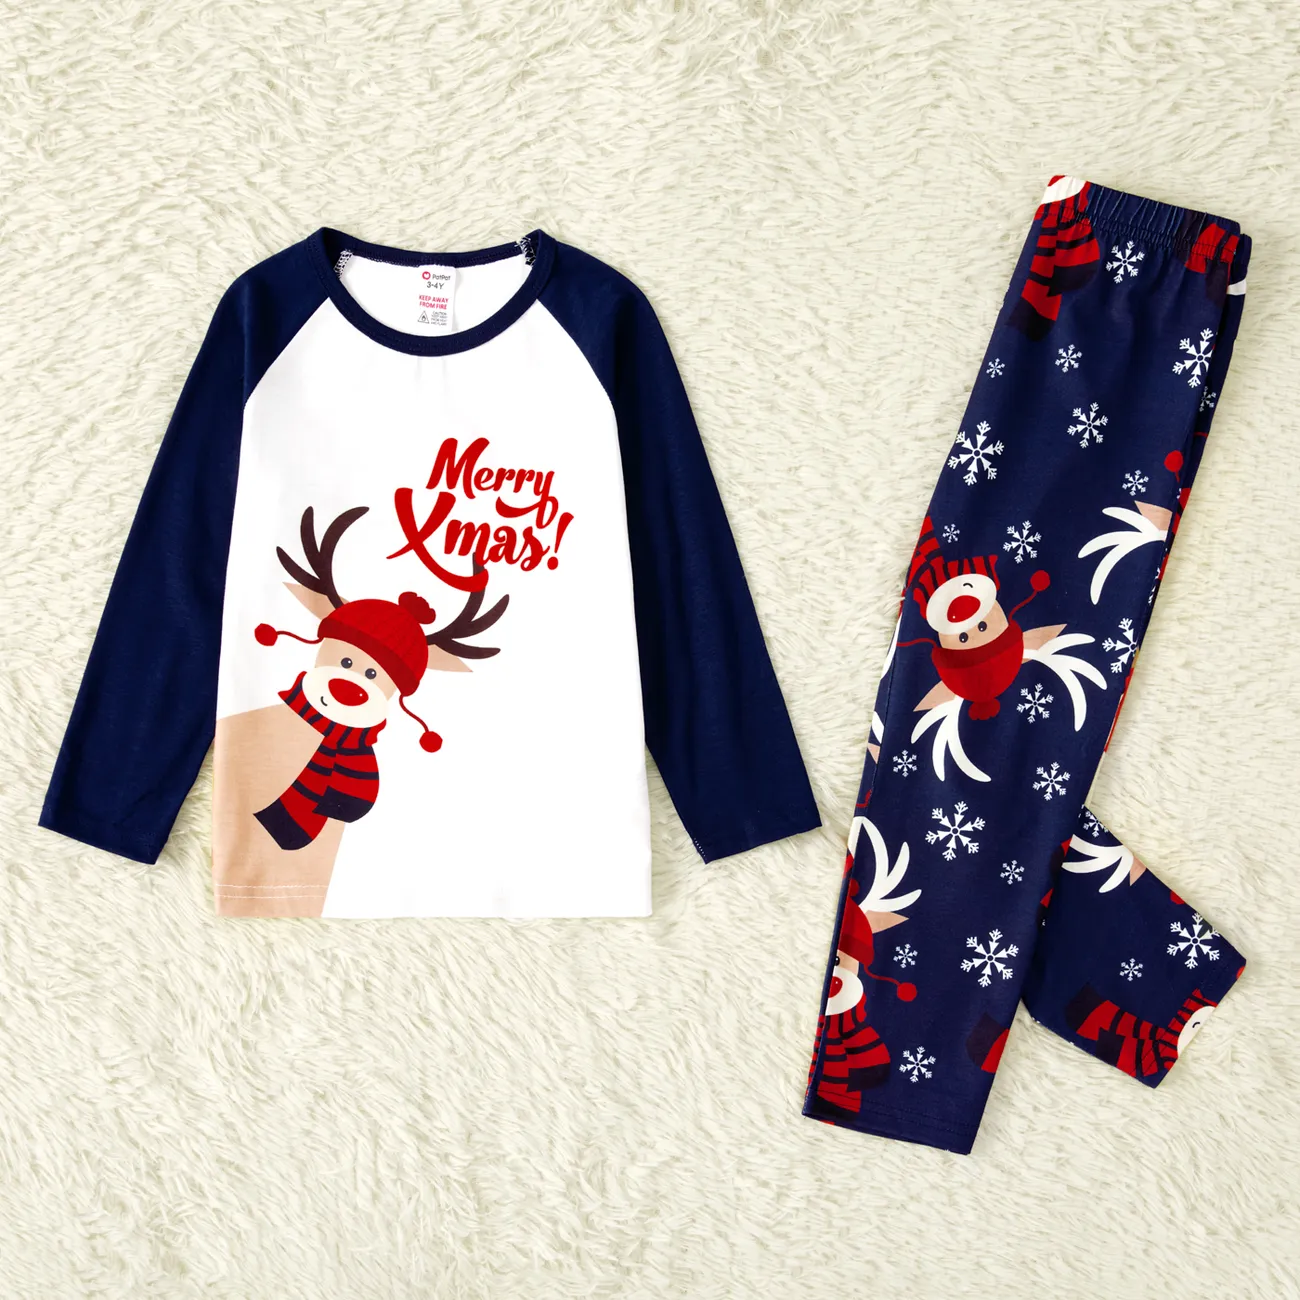 Merry Xmas Letters and Reindeer Print Navy Family Matching Long-sleeve Pajamas Sets (Flame Resistant) Dark blue/White/Red big image 1